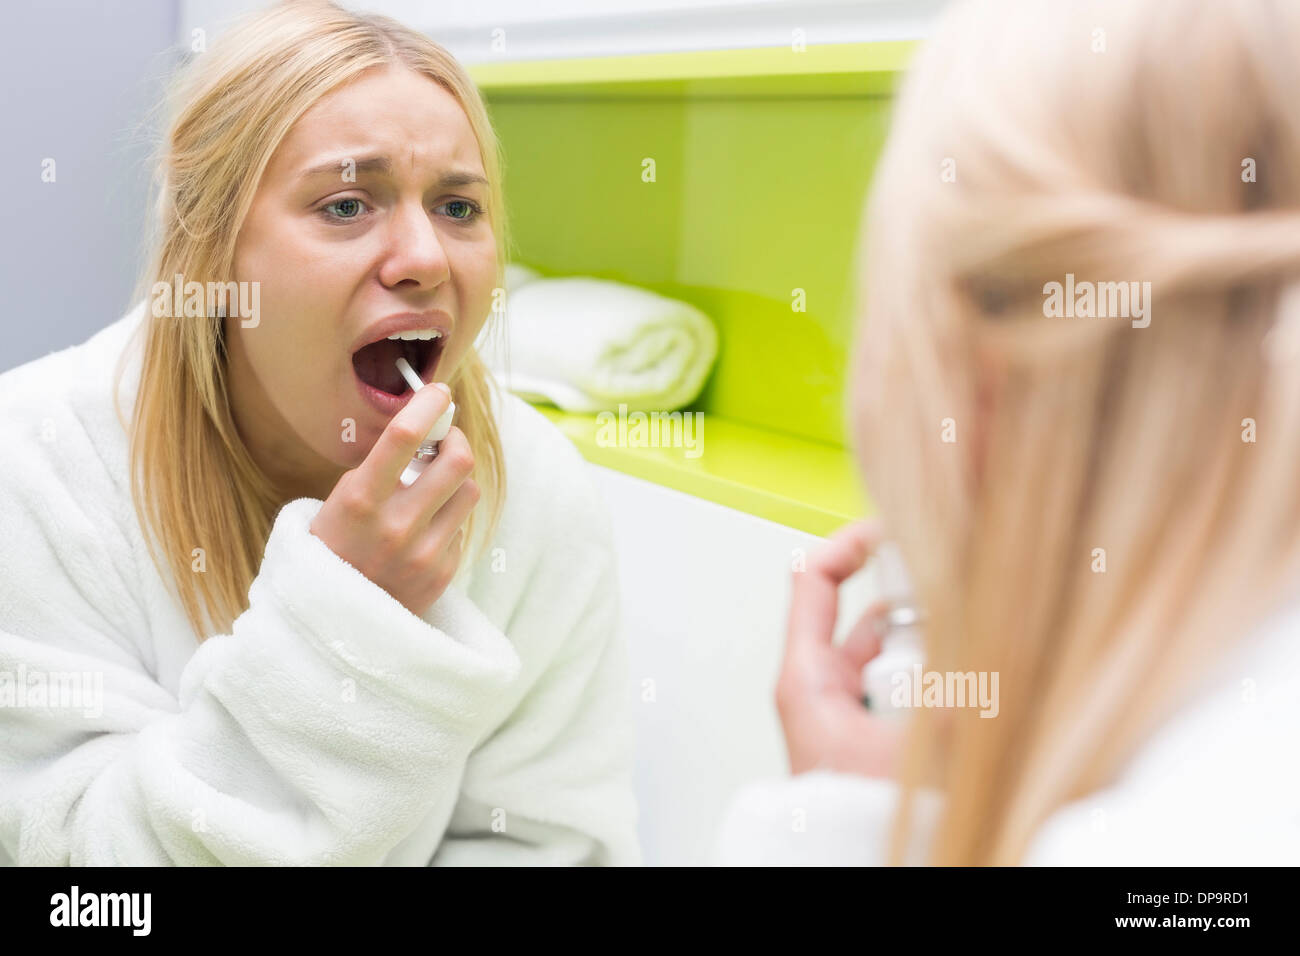 Reflection of woman spraying medicine in mouth Stock Photo